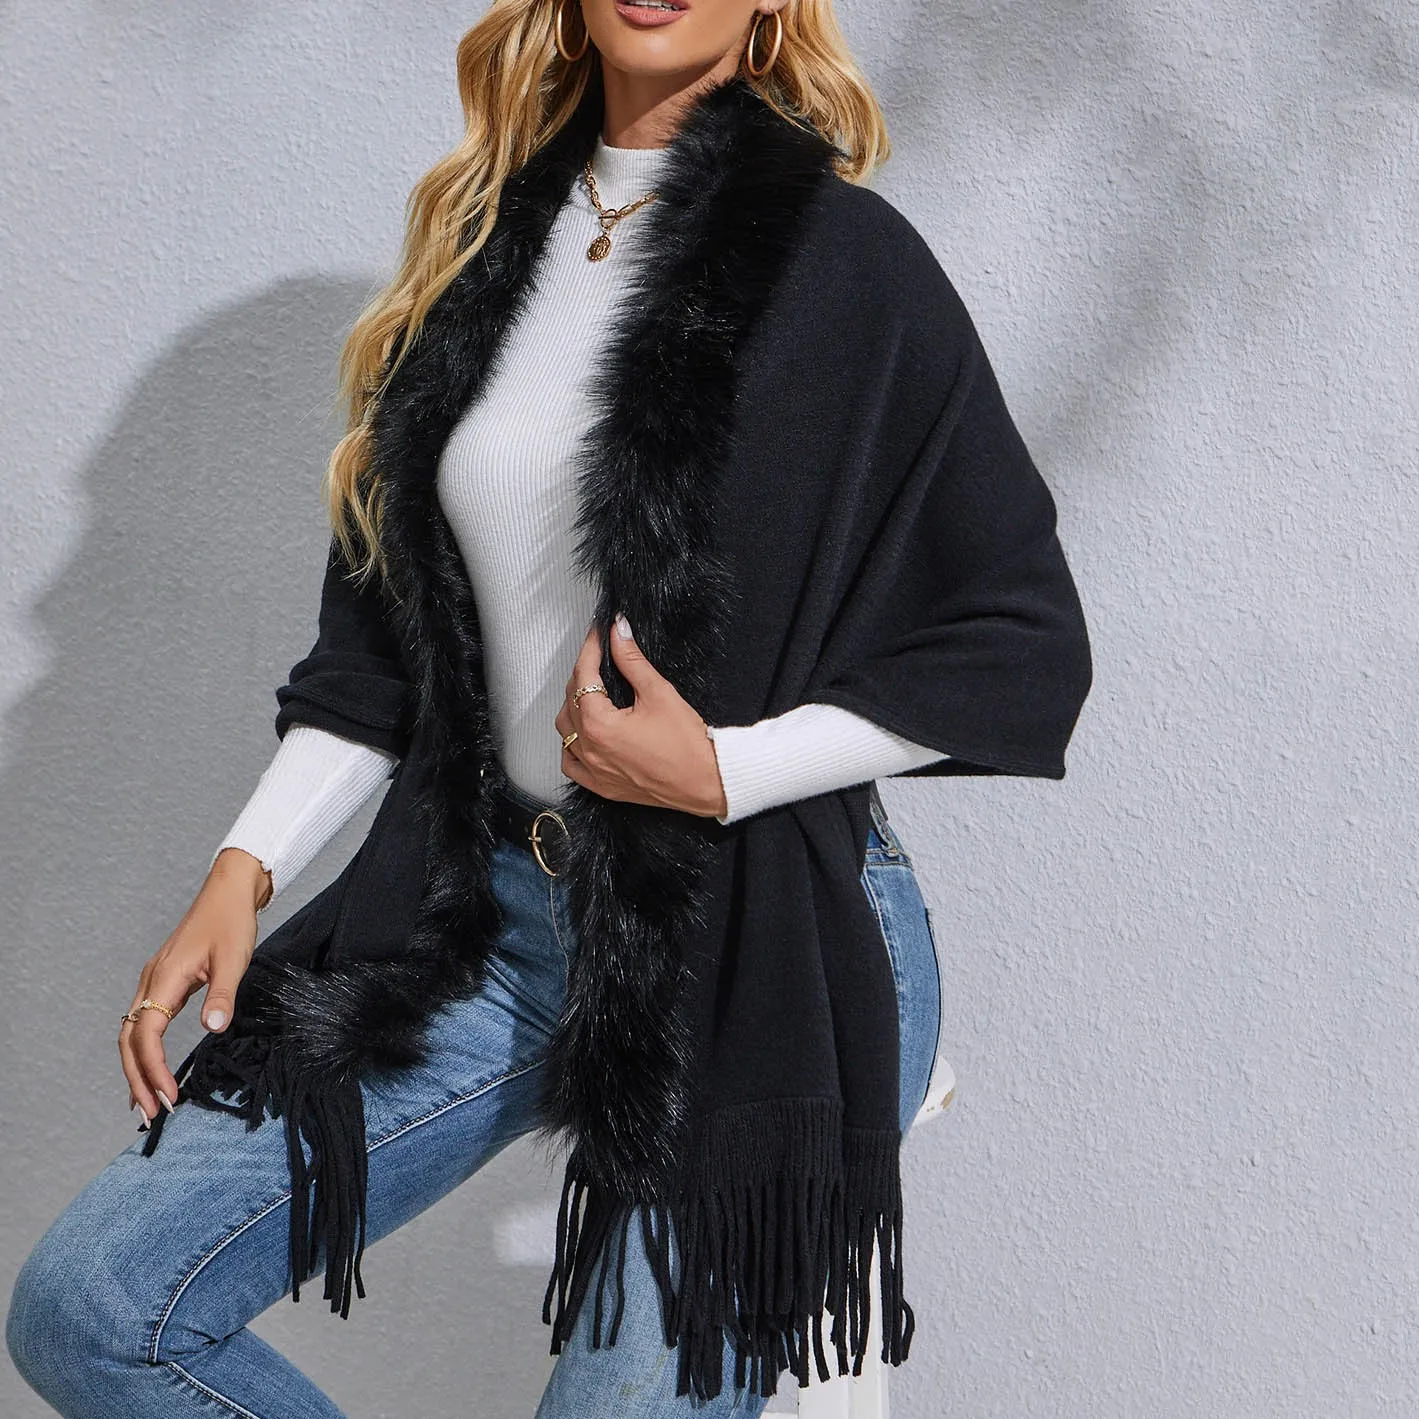 

Fur Collar Winter Shawls And Wraps Bohemian Fringe Oversized Womens Winter Ponchos And Capes Batwing Sleeve Cardigan